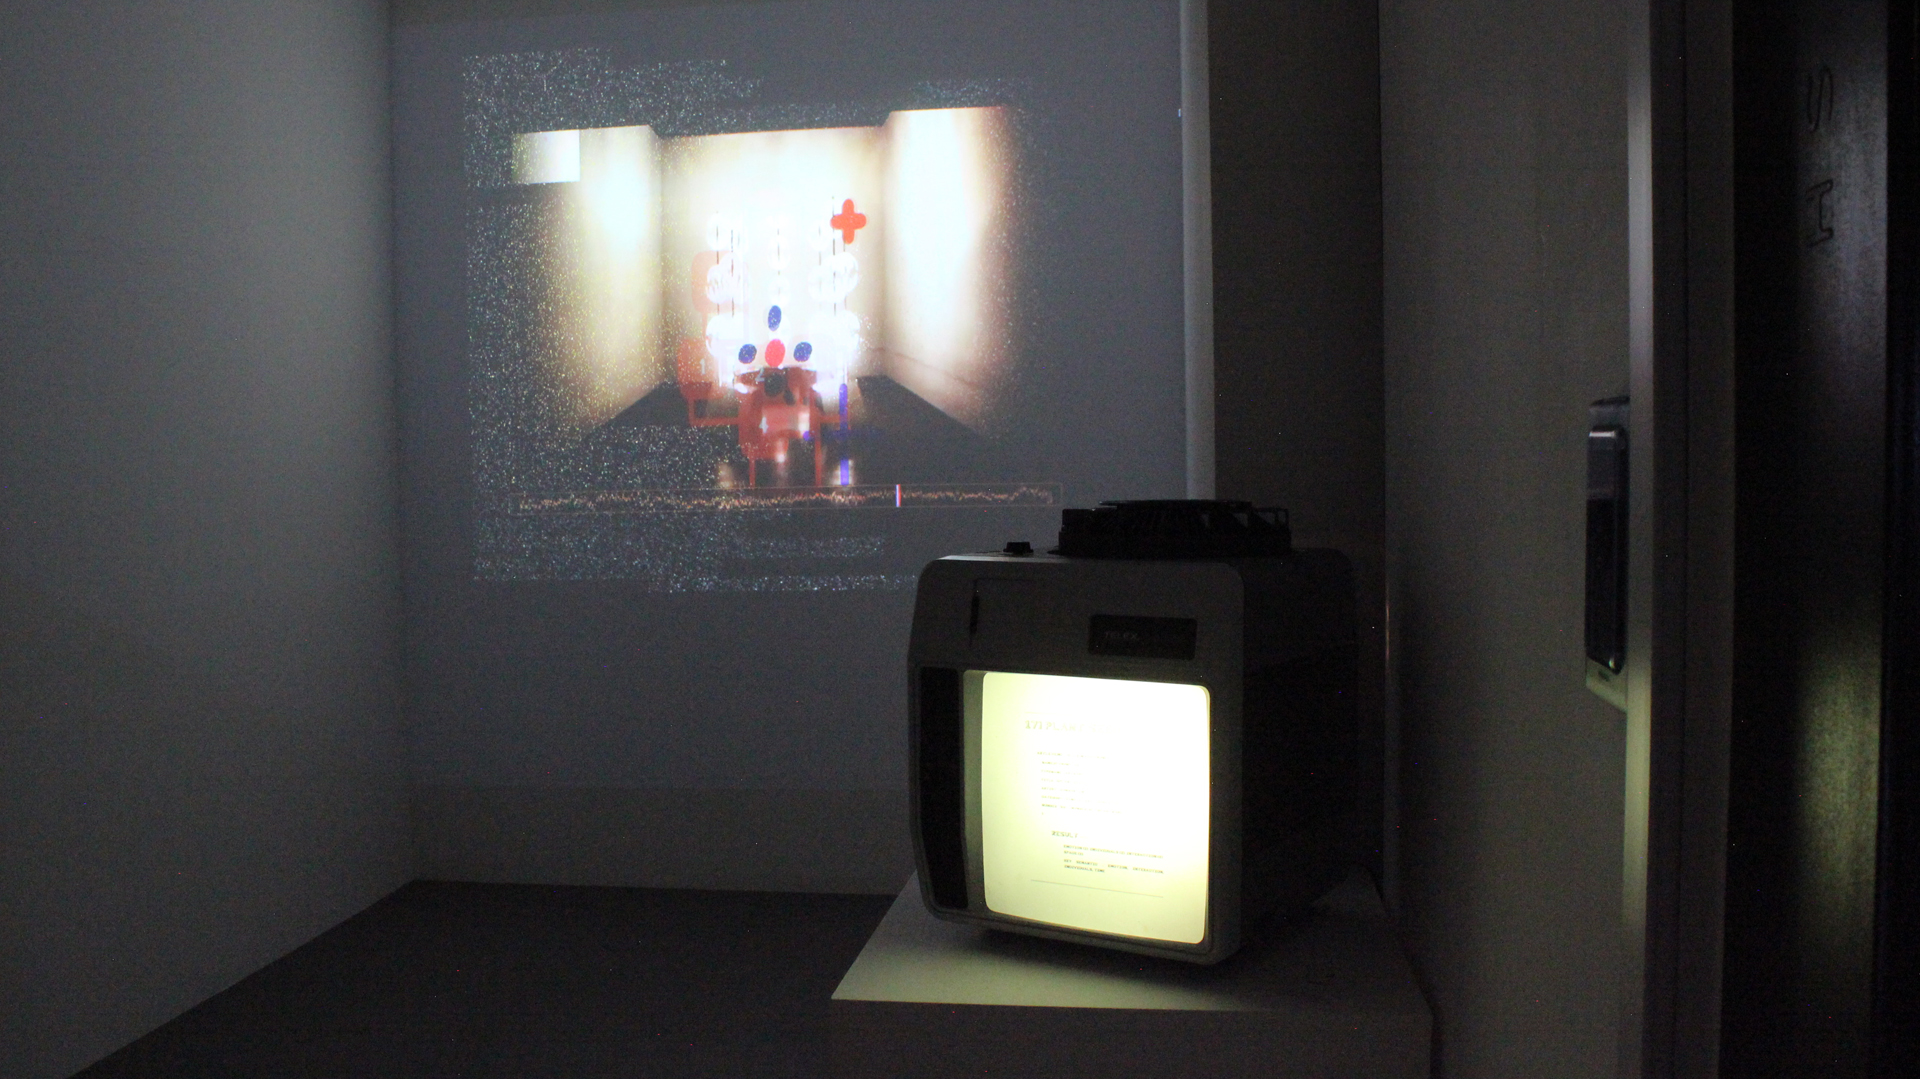 ©, Jooyoung Oh and Byungjoo Lee, Artificial Viewer for Appreciation of Interactive Art Surrogates